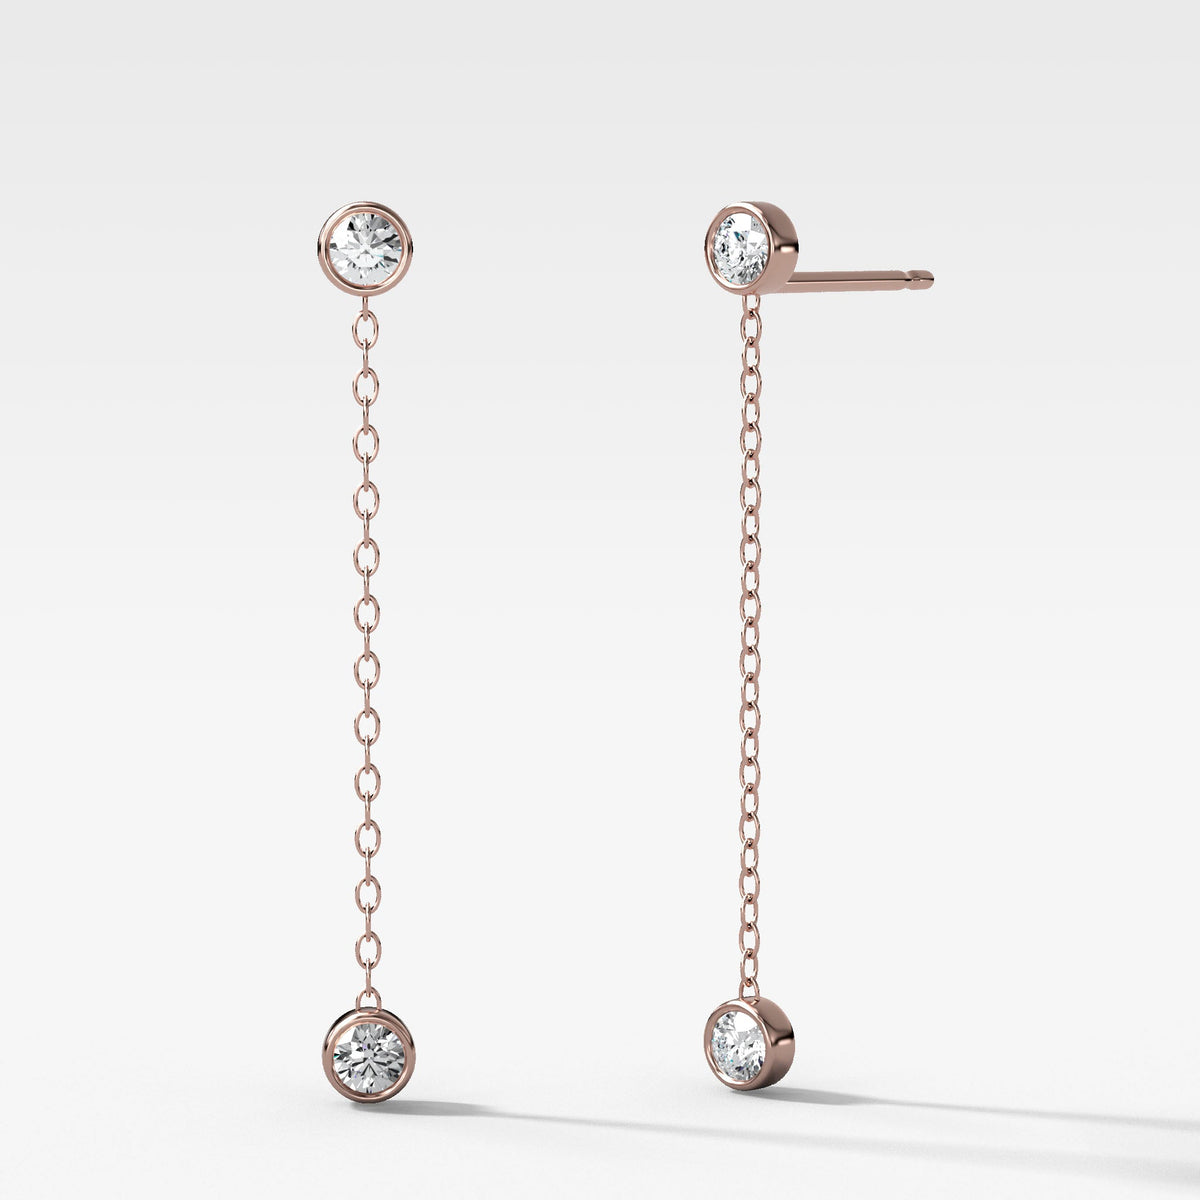 Diamond Drop Chain Earrings in Rose Gold by Good Stone